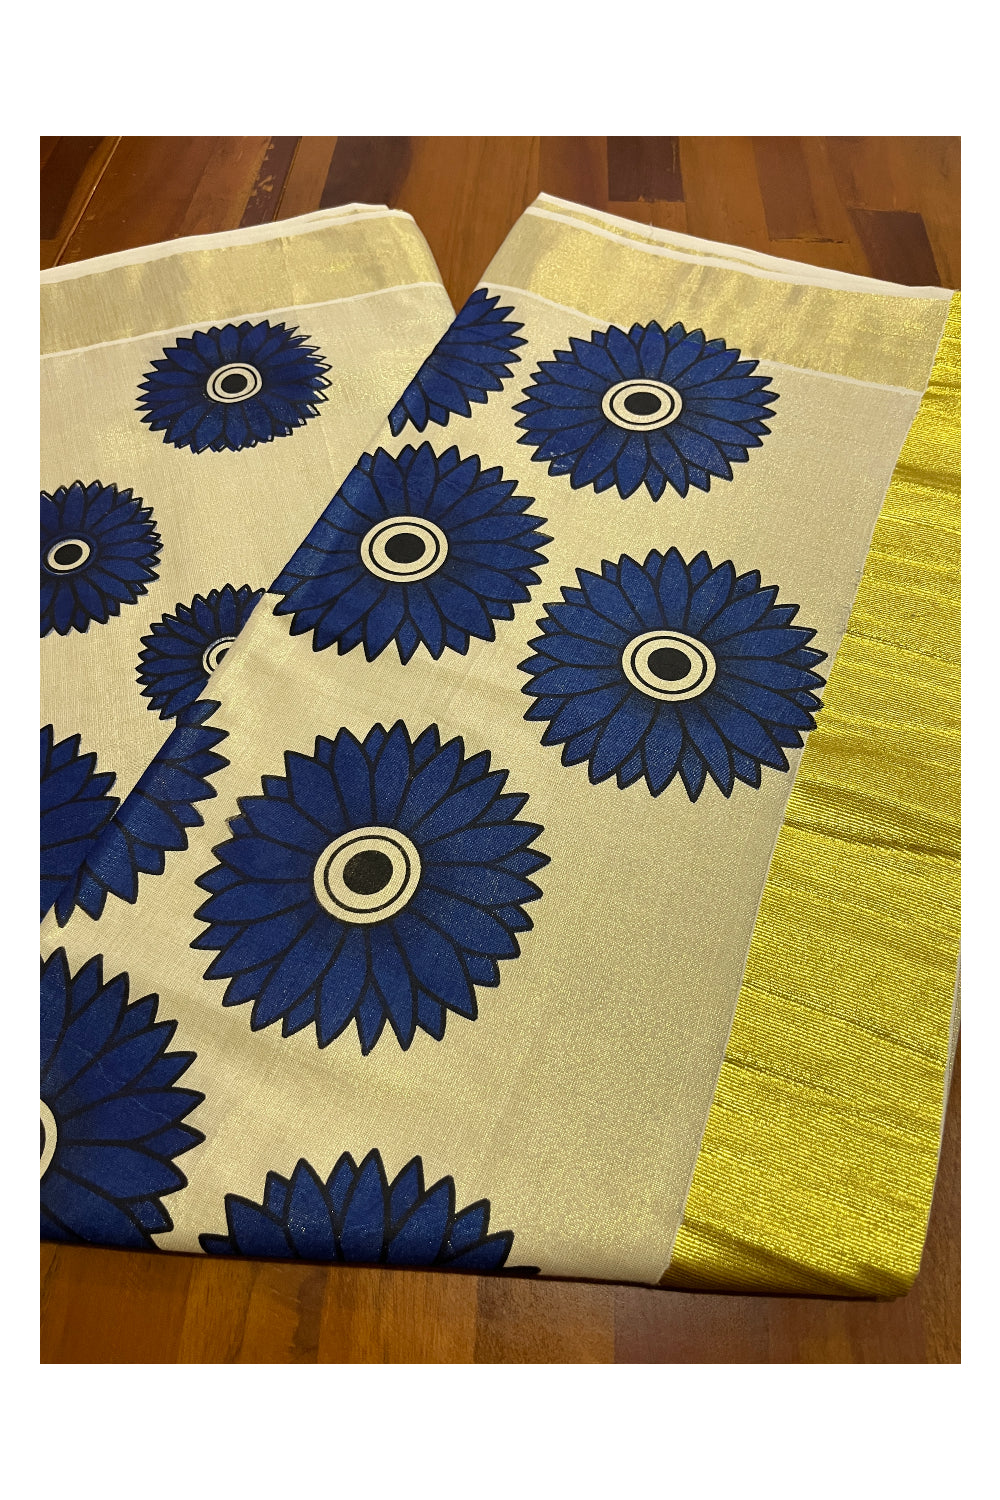 Southloom Exclusive Tissue Kasavu Saree With Blue Sunflower Art On Body and Pallu